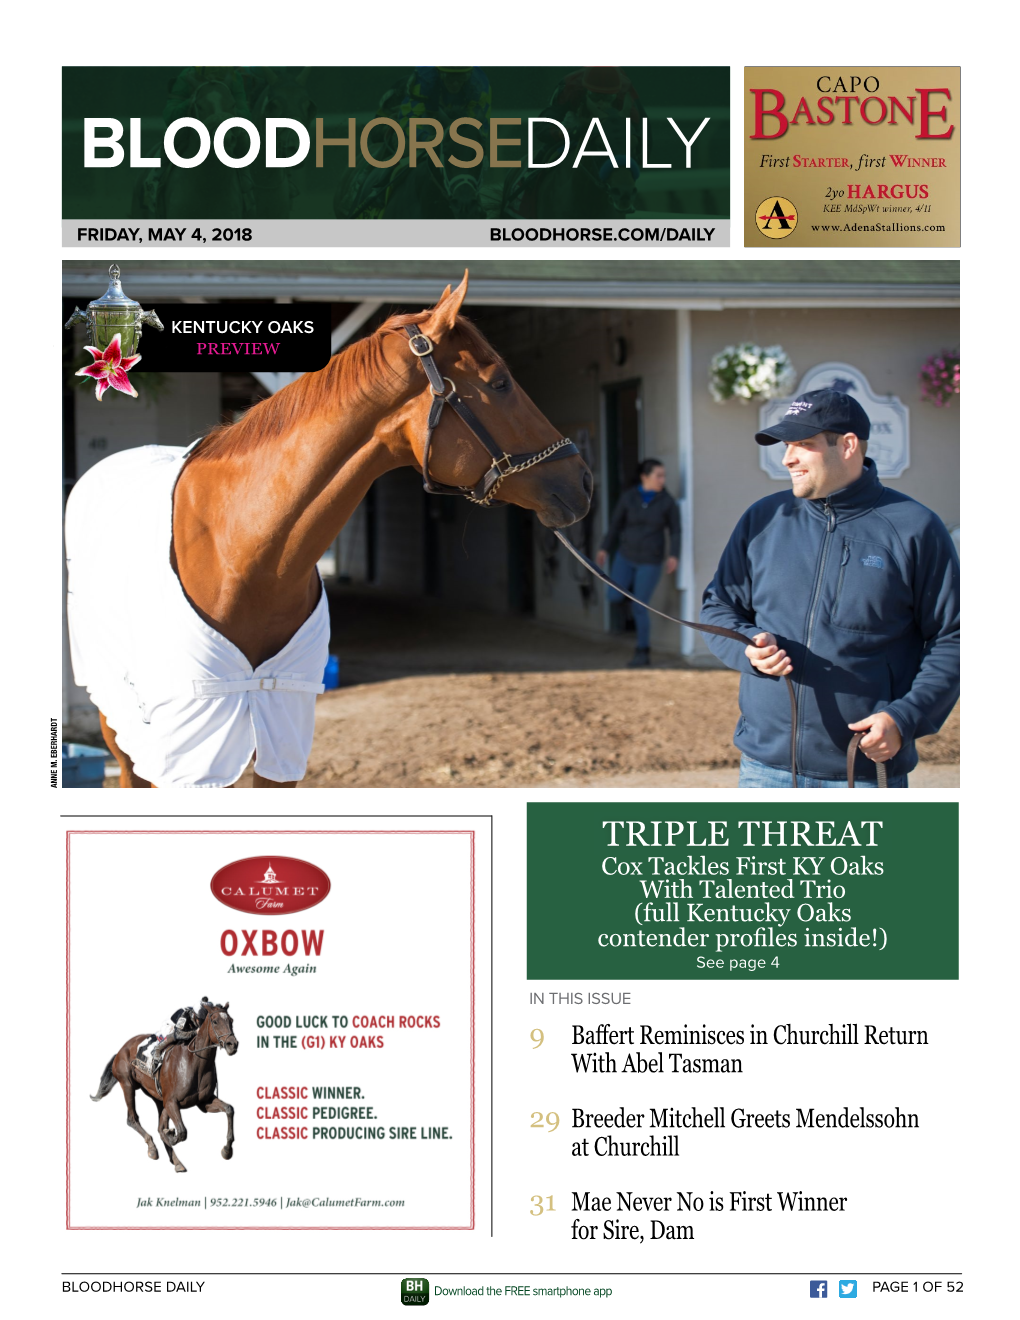 TRIPLE THREAT Cox Tackles First KY Oaks with Talented Trio (Full Kentucky Oaks Contender Profiles Inside!) See Page 4